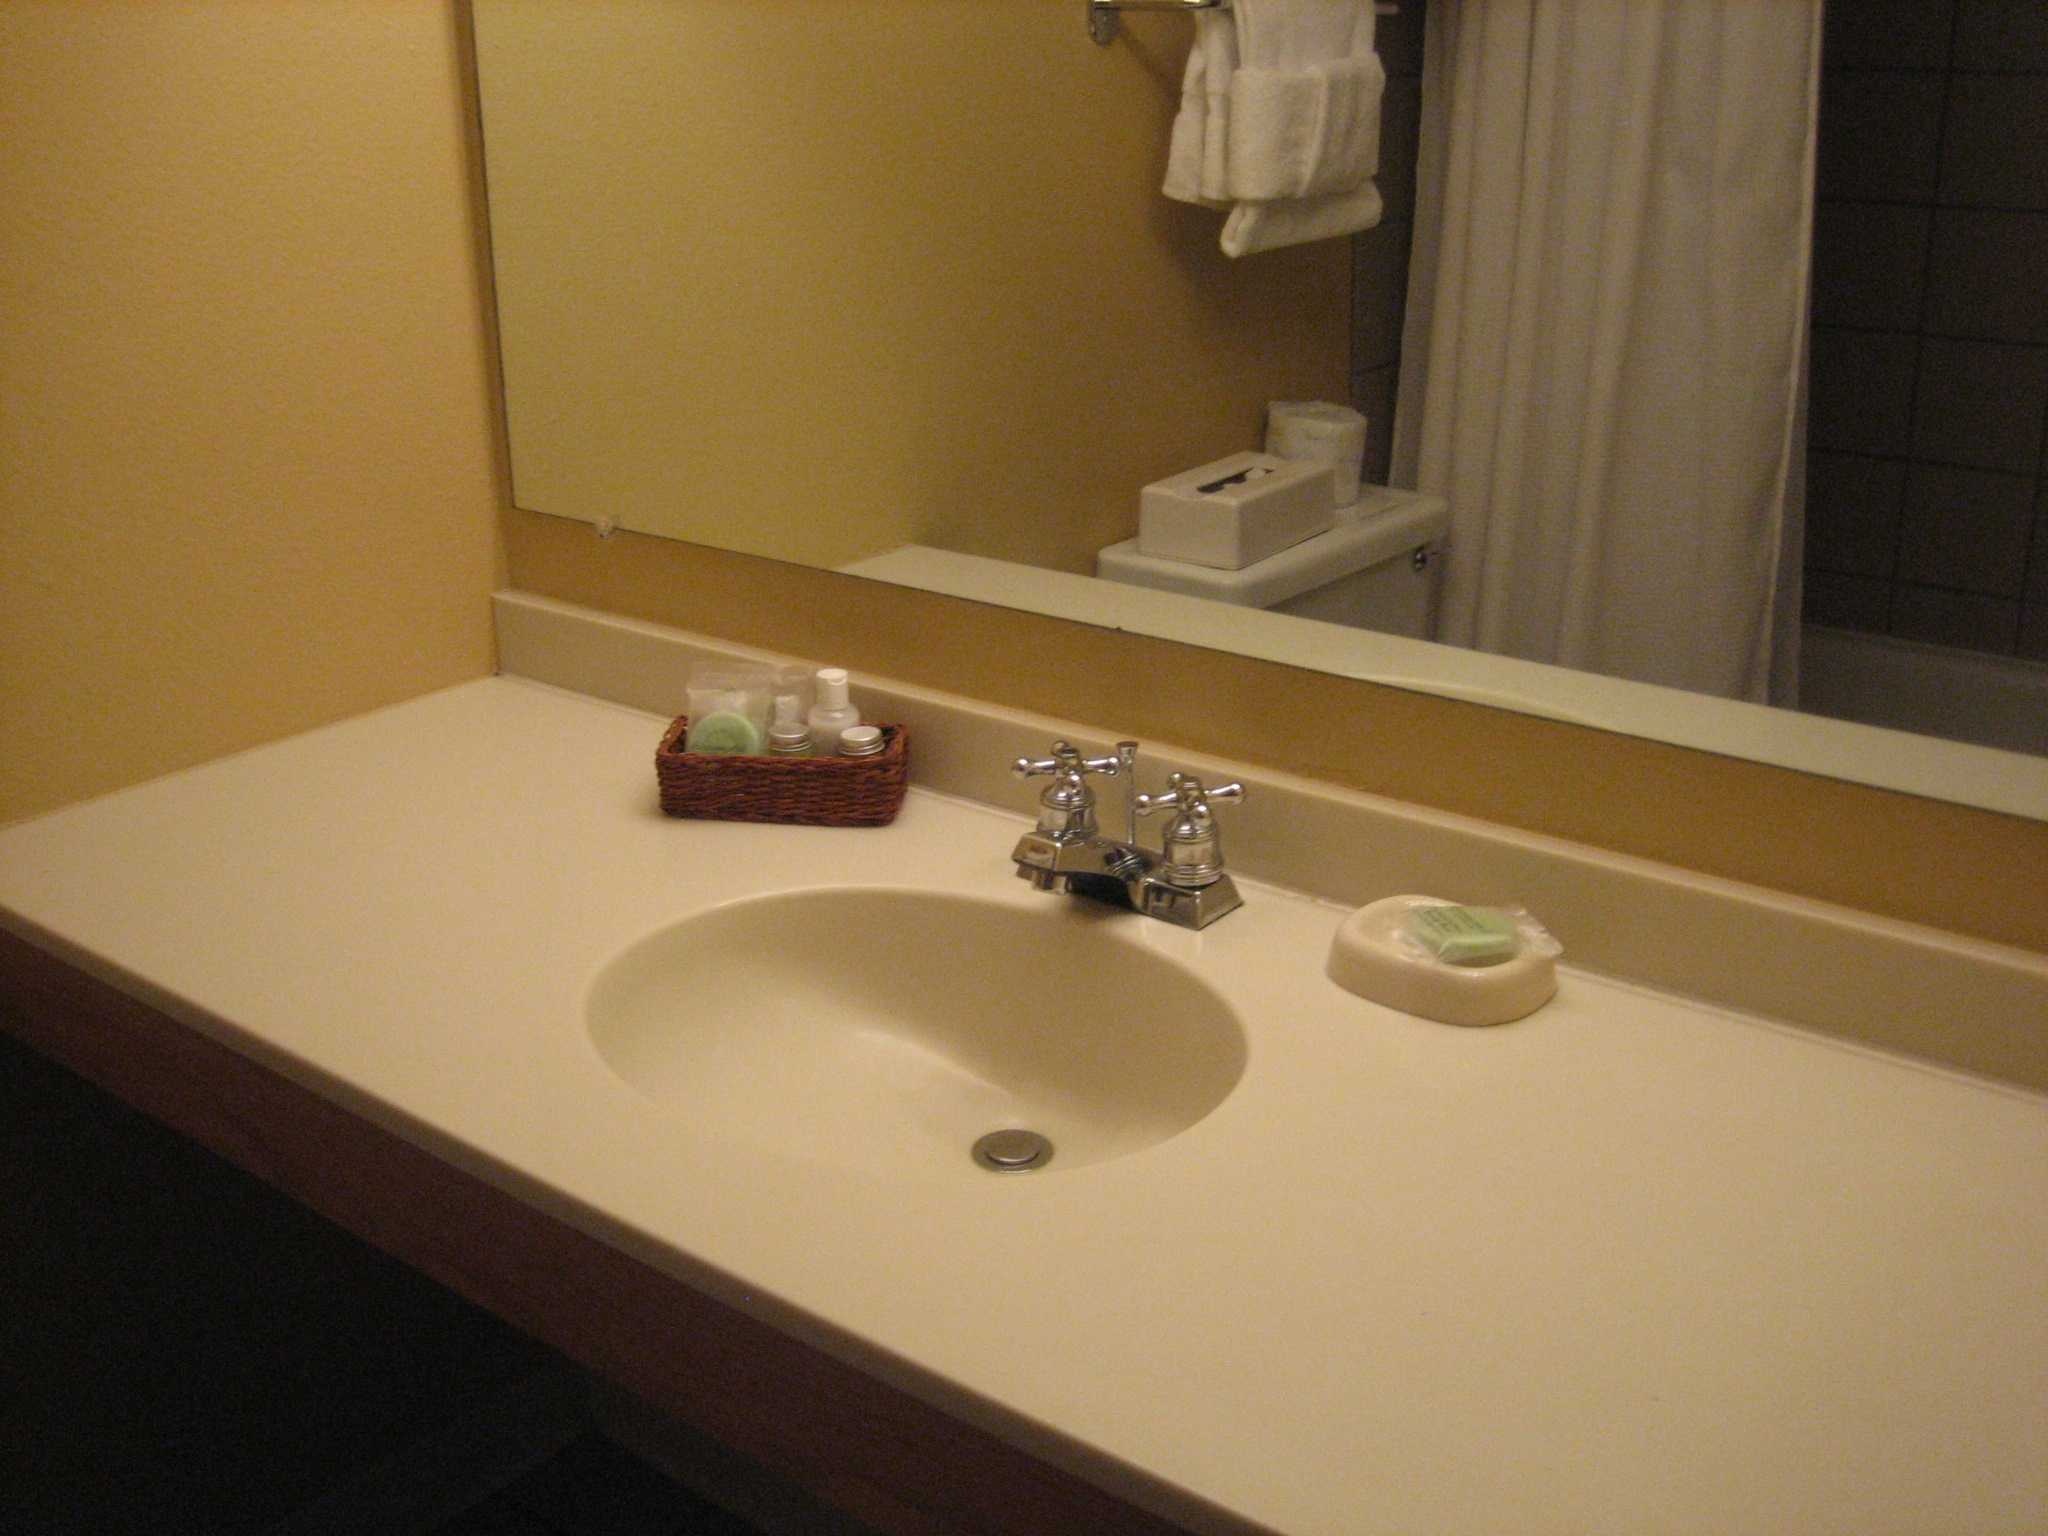 Bathroom image classifcation dataset for machine learning